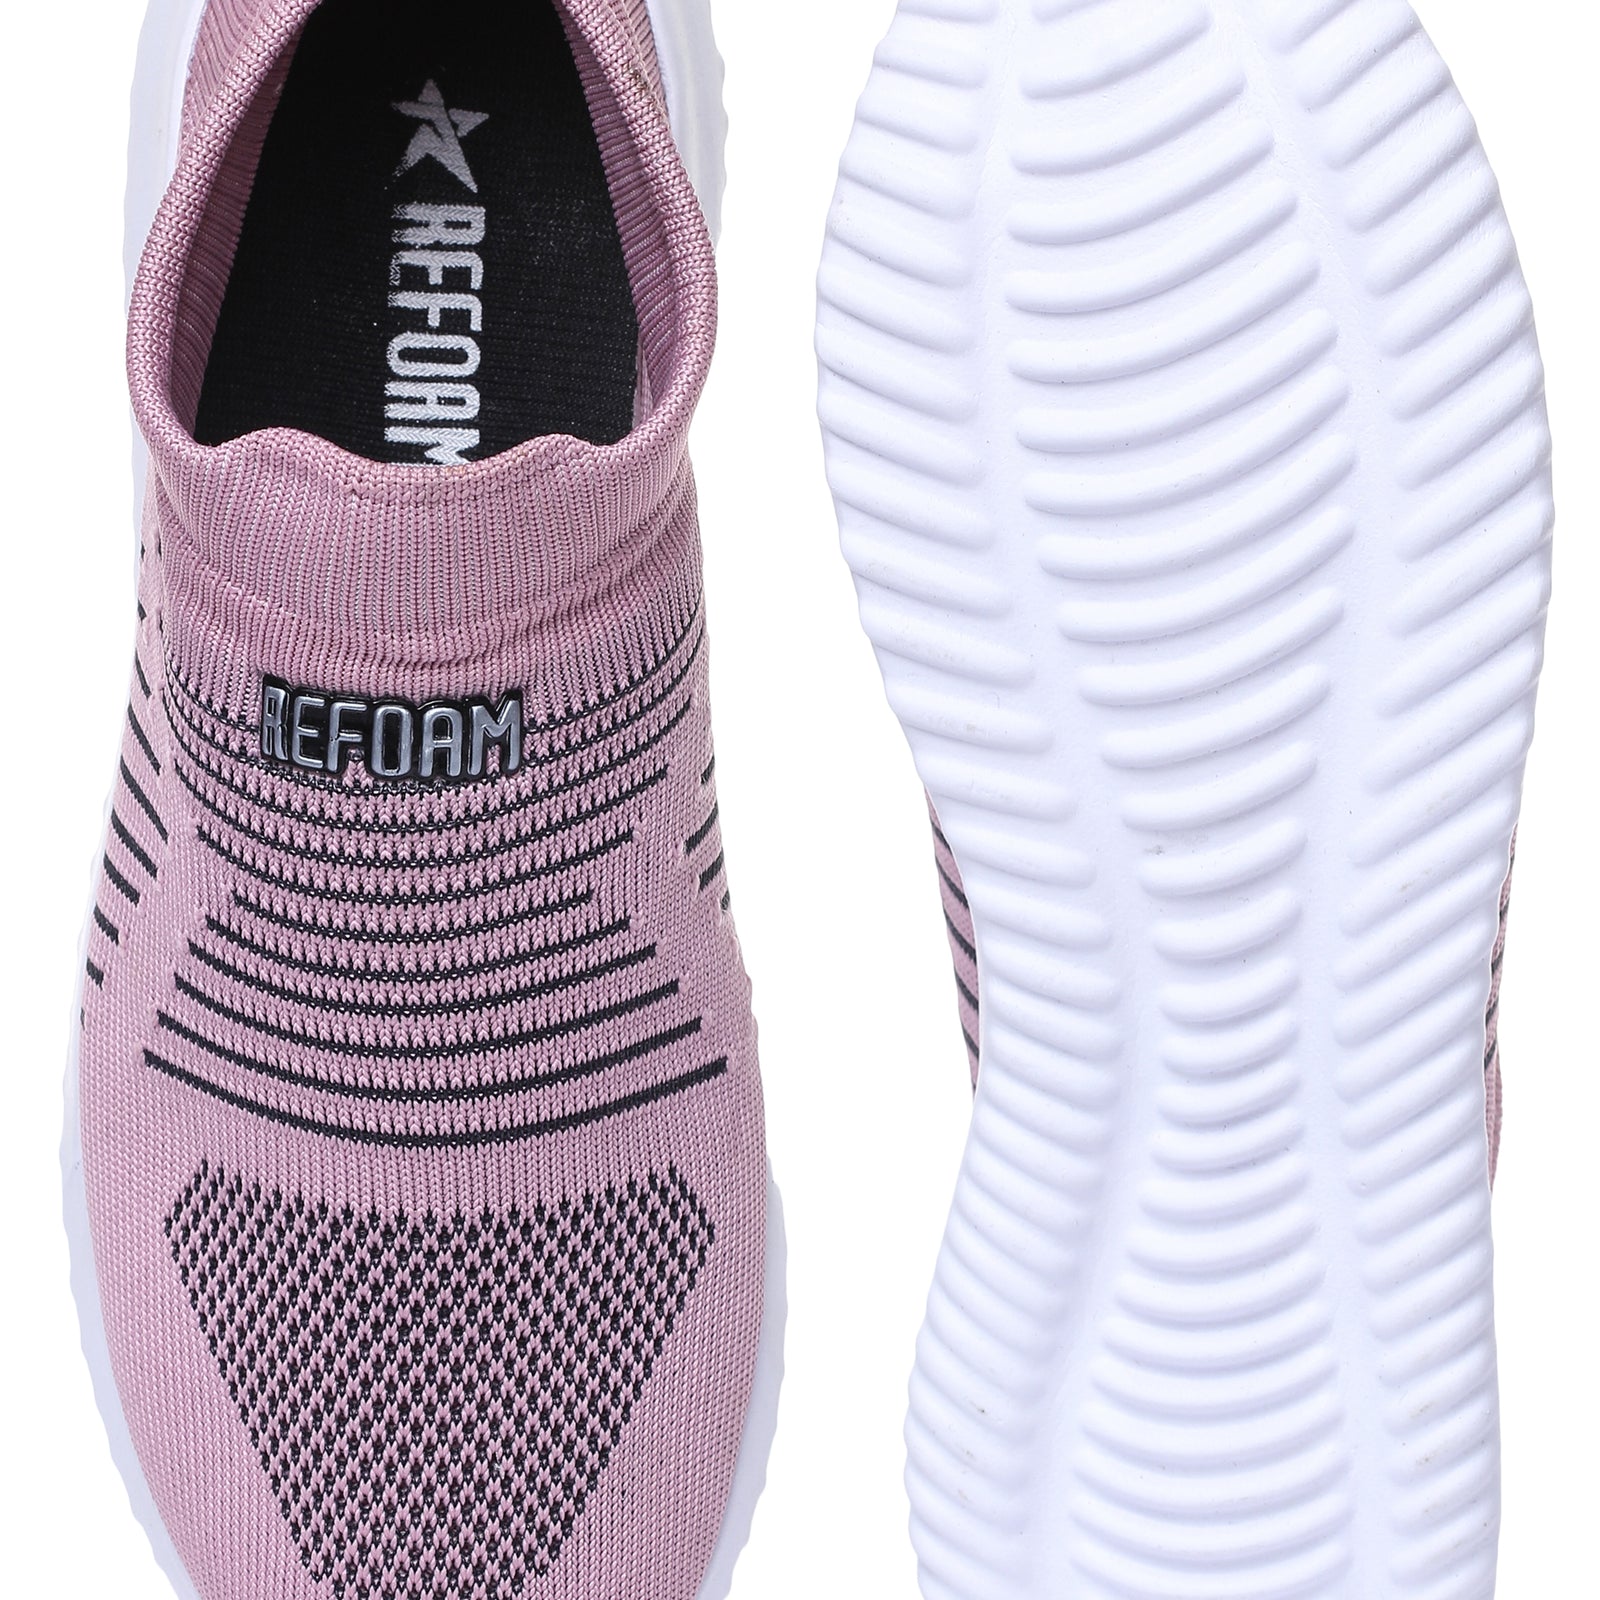 Pink Solid Mesh Slip On Running Sport Shoes For Women